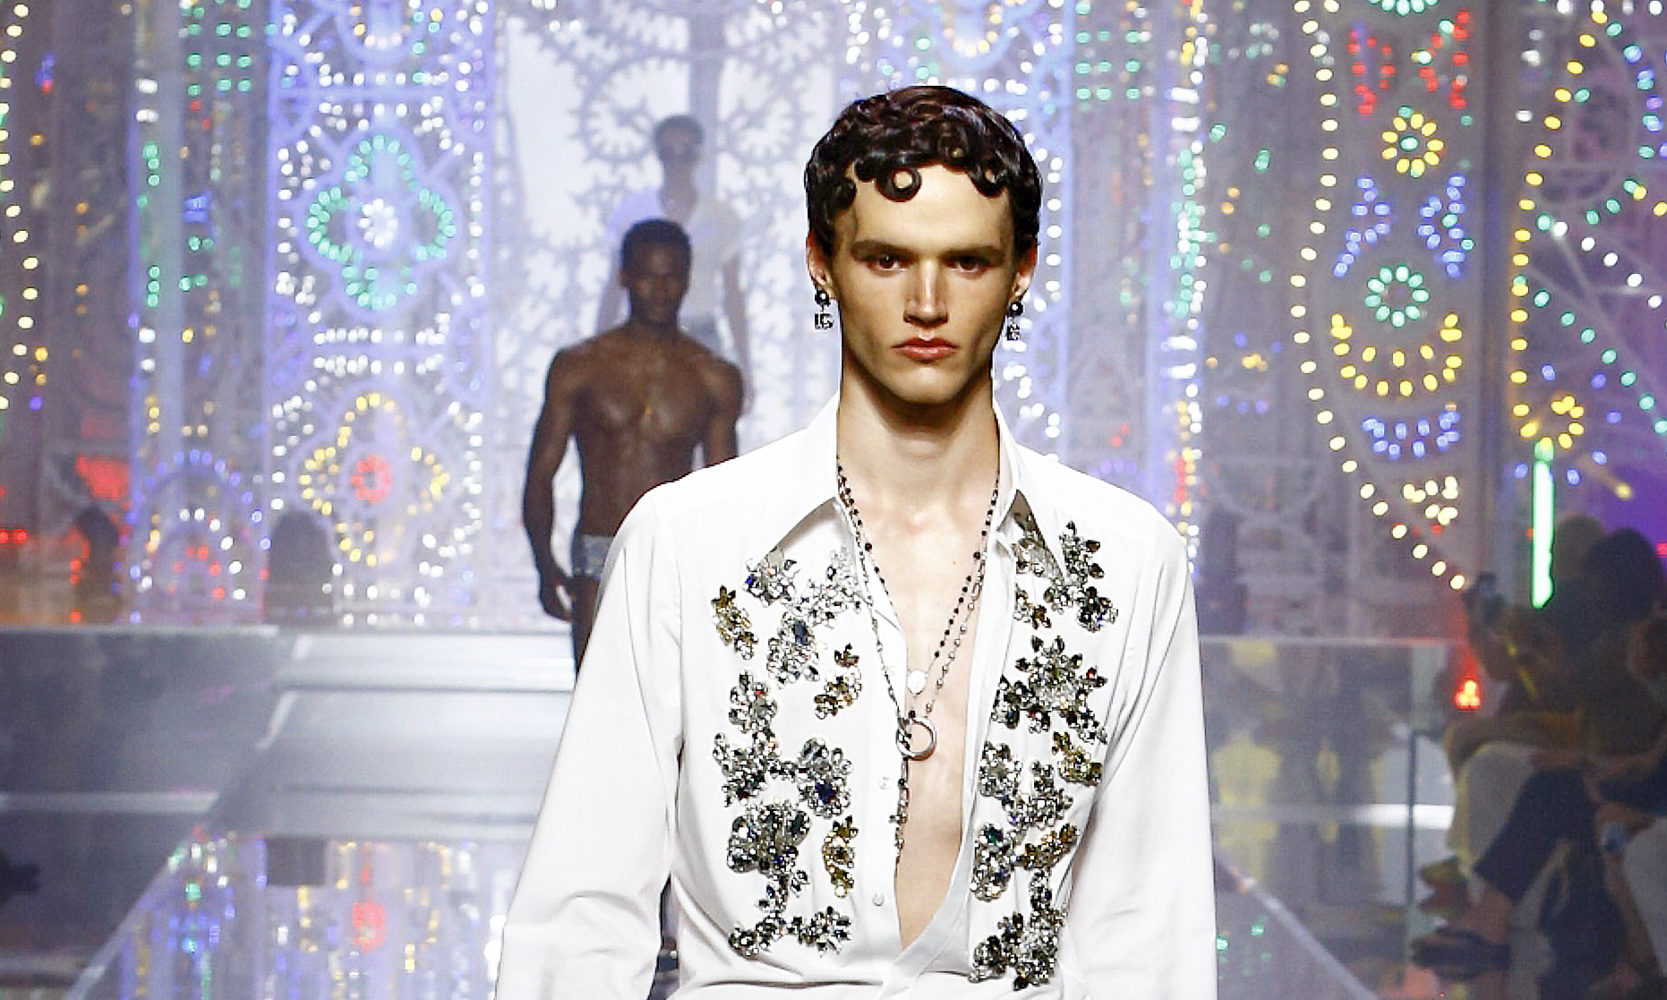 Dolce&Gabbana: Dolce&Gabbana Presents Its New Spring Summer 2022 Men's  Fashion Show: #DGLightTherapy - Luxferity